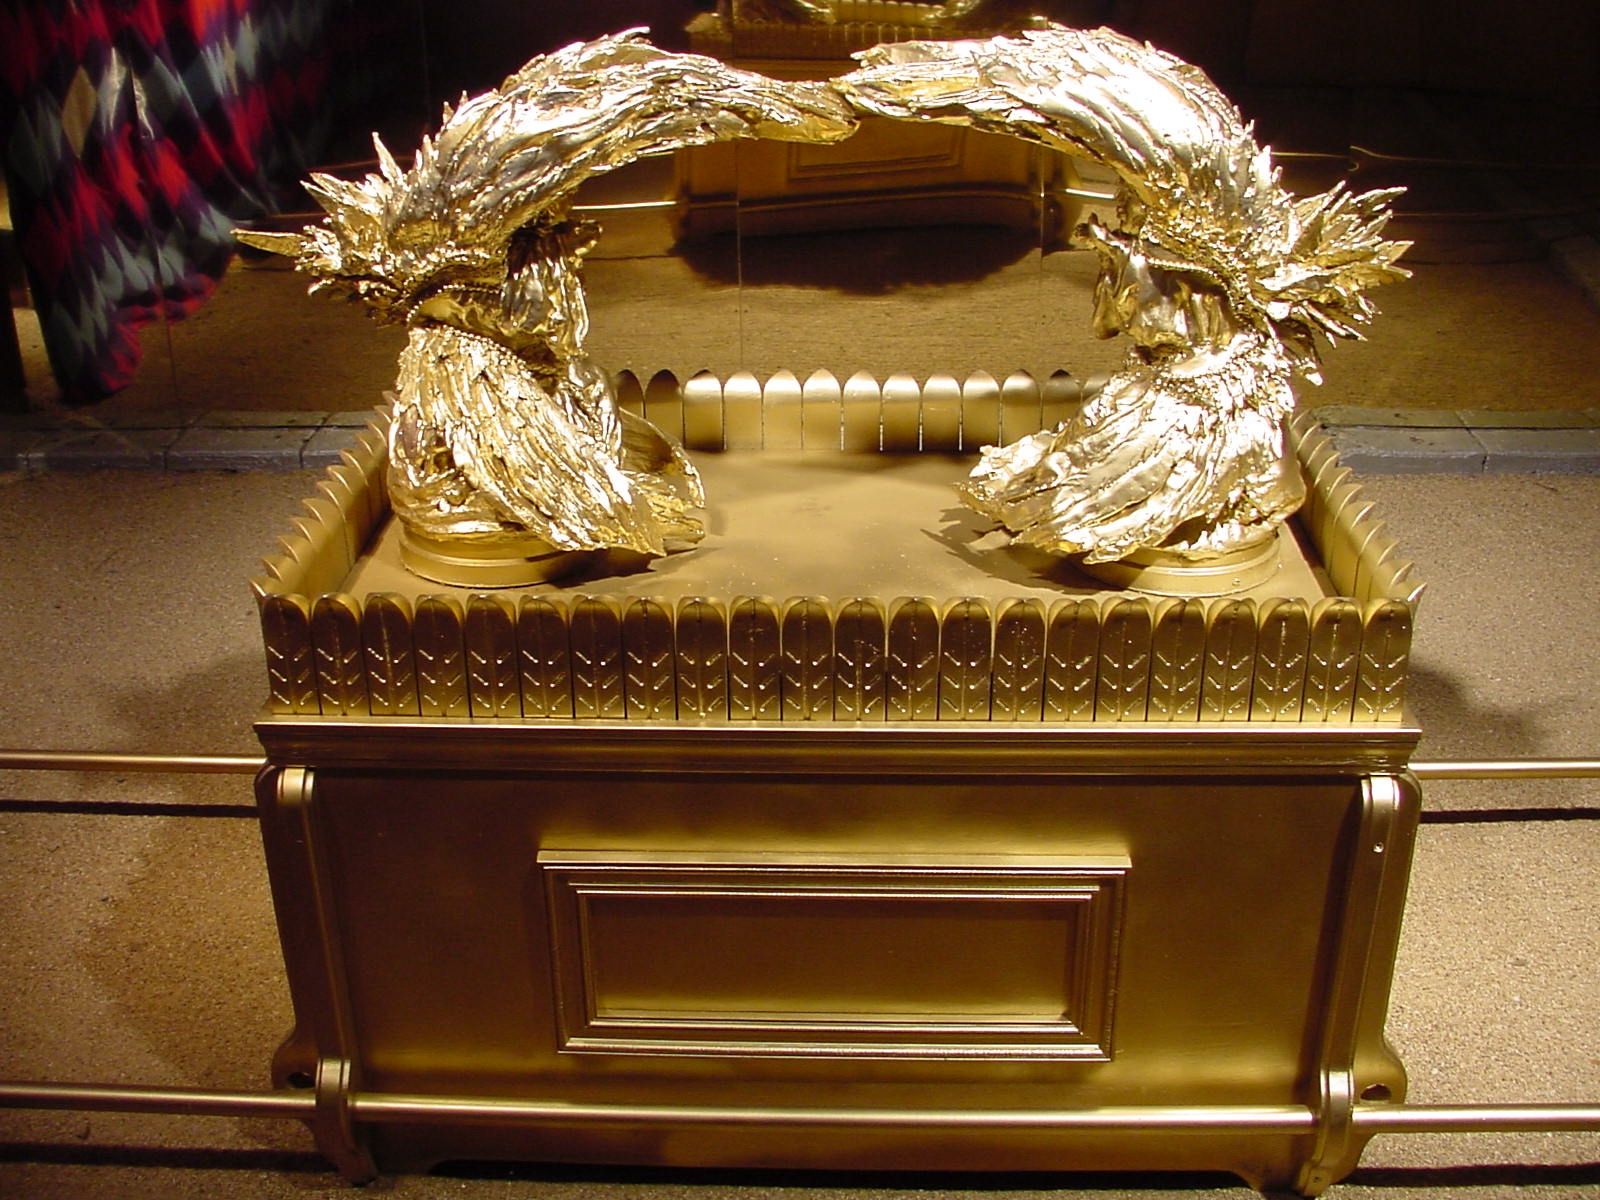 Two Arks Conference Noah's Ark and the Ark of the Covenant. The Great Passion Play